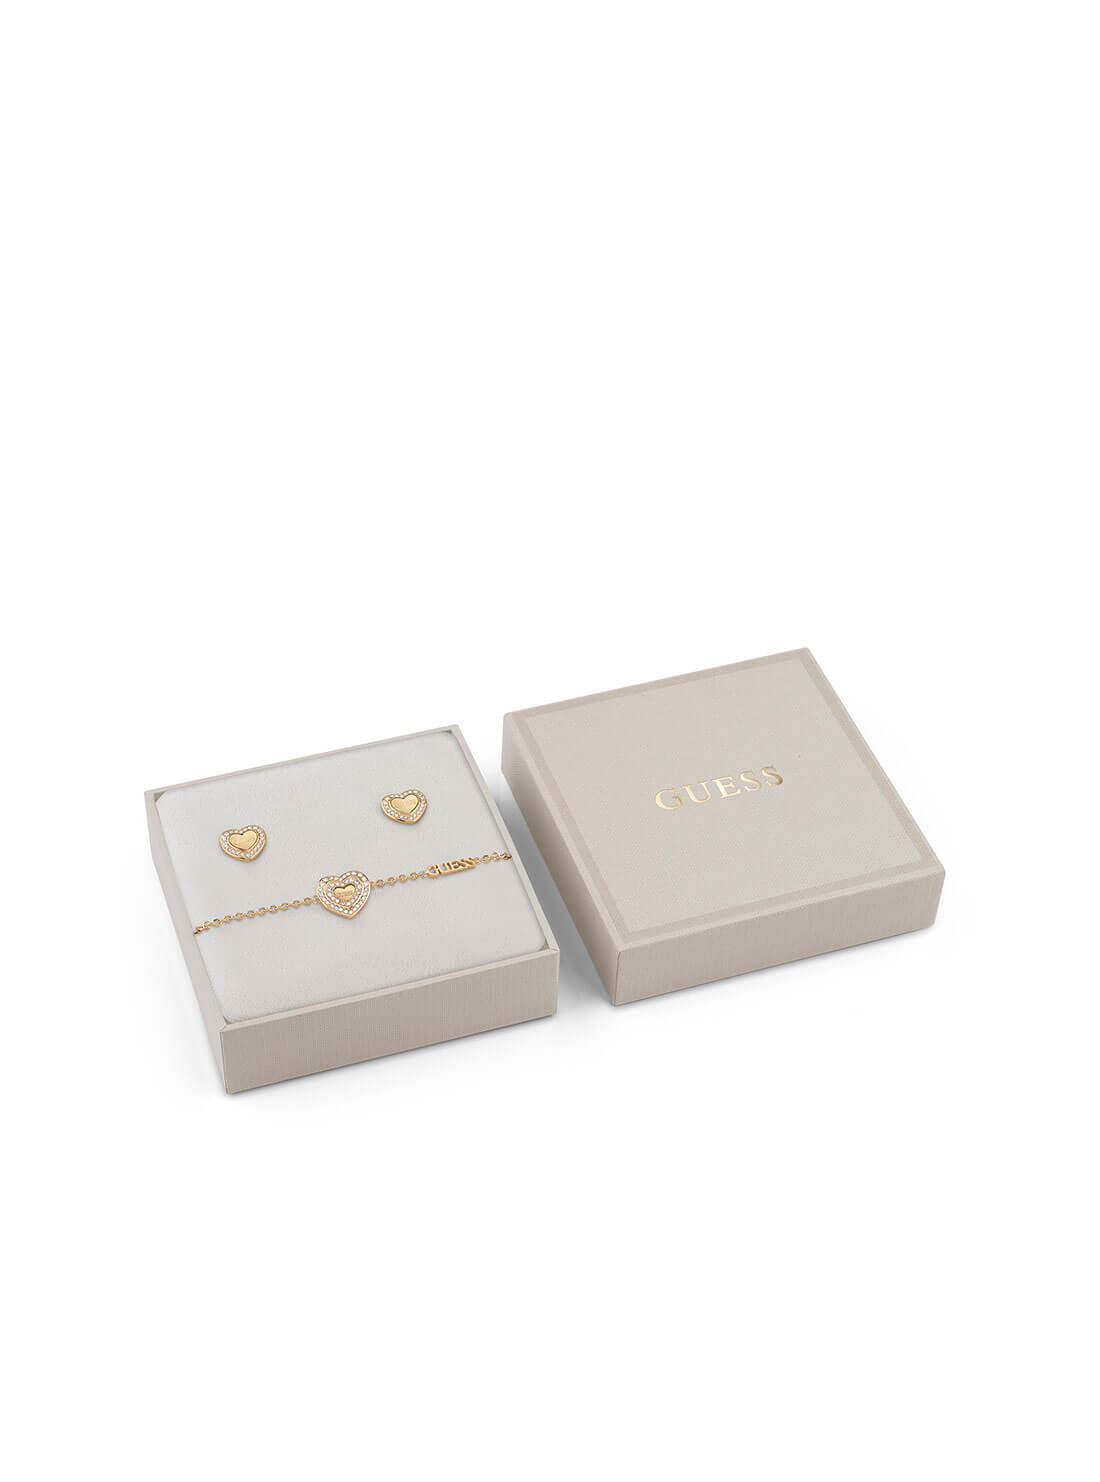 Gold Amami Crystal Heart Bracelet and Stud Earrings Set | GUESS Women's Jewellery | front view